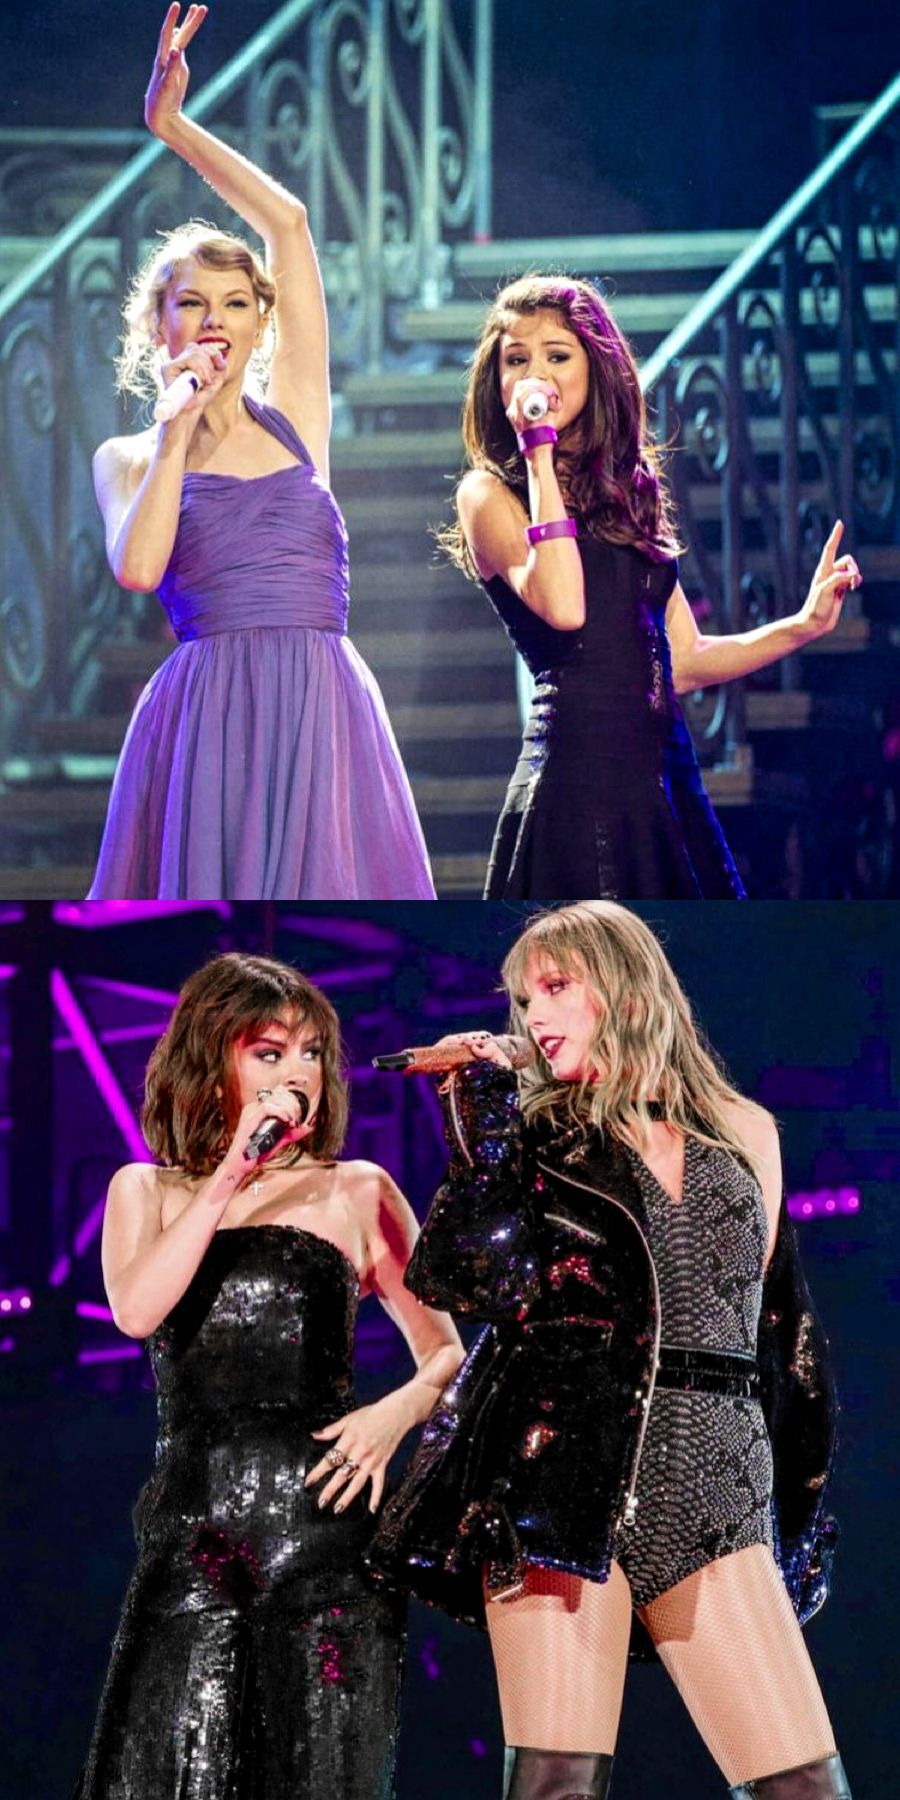 z. Selena and taylor, Taylor alison swift, Taylor swift picture